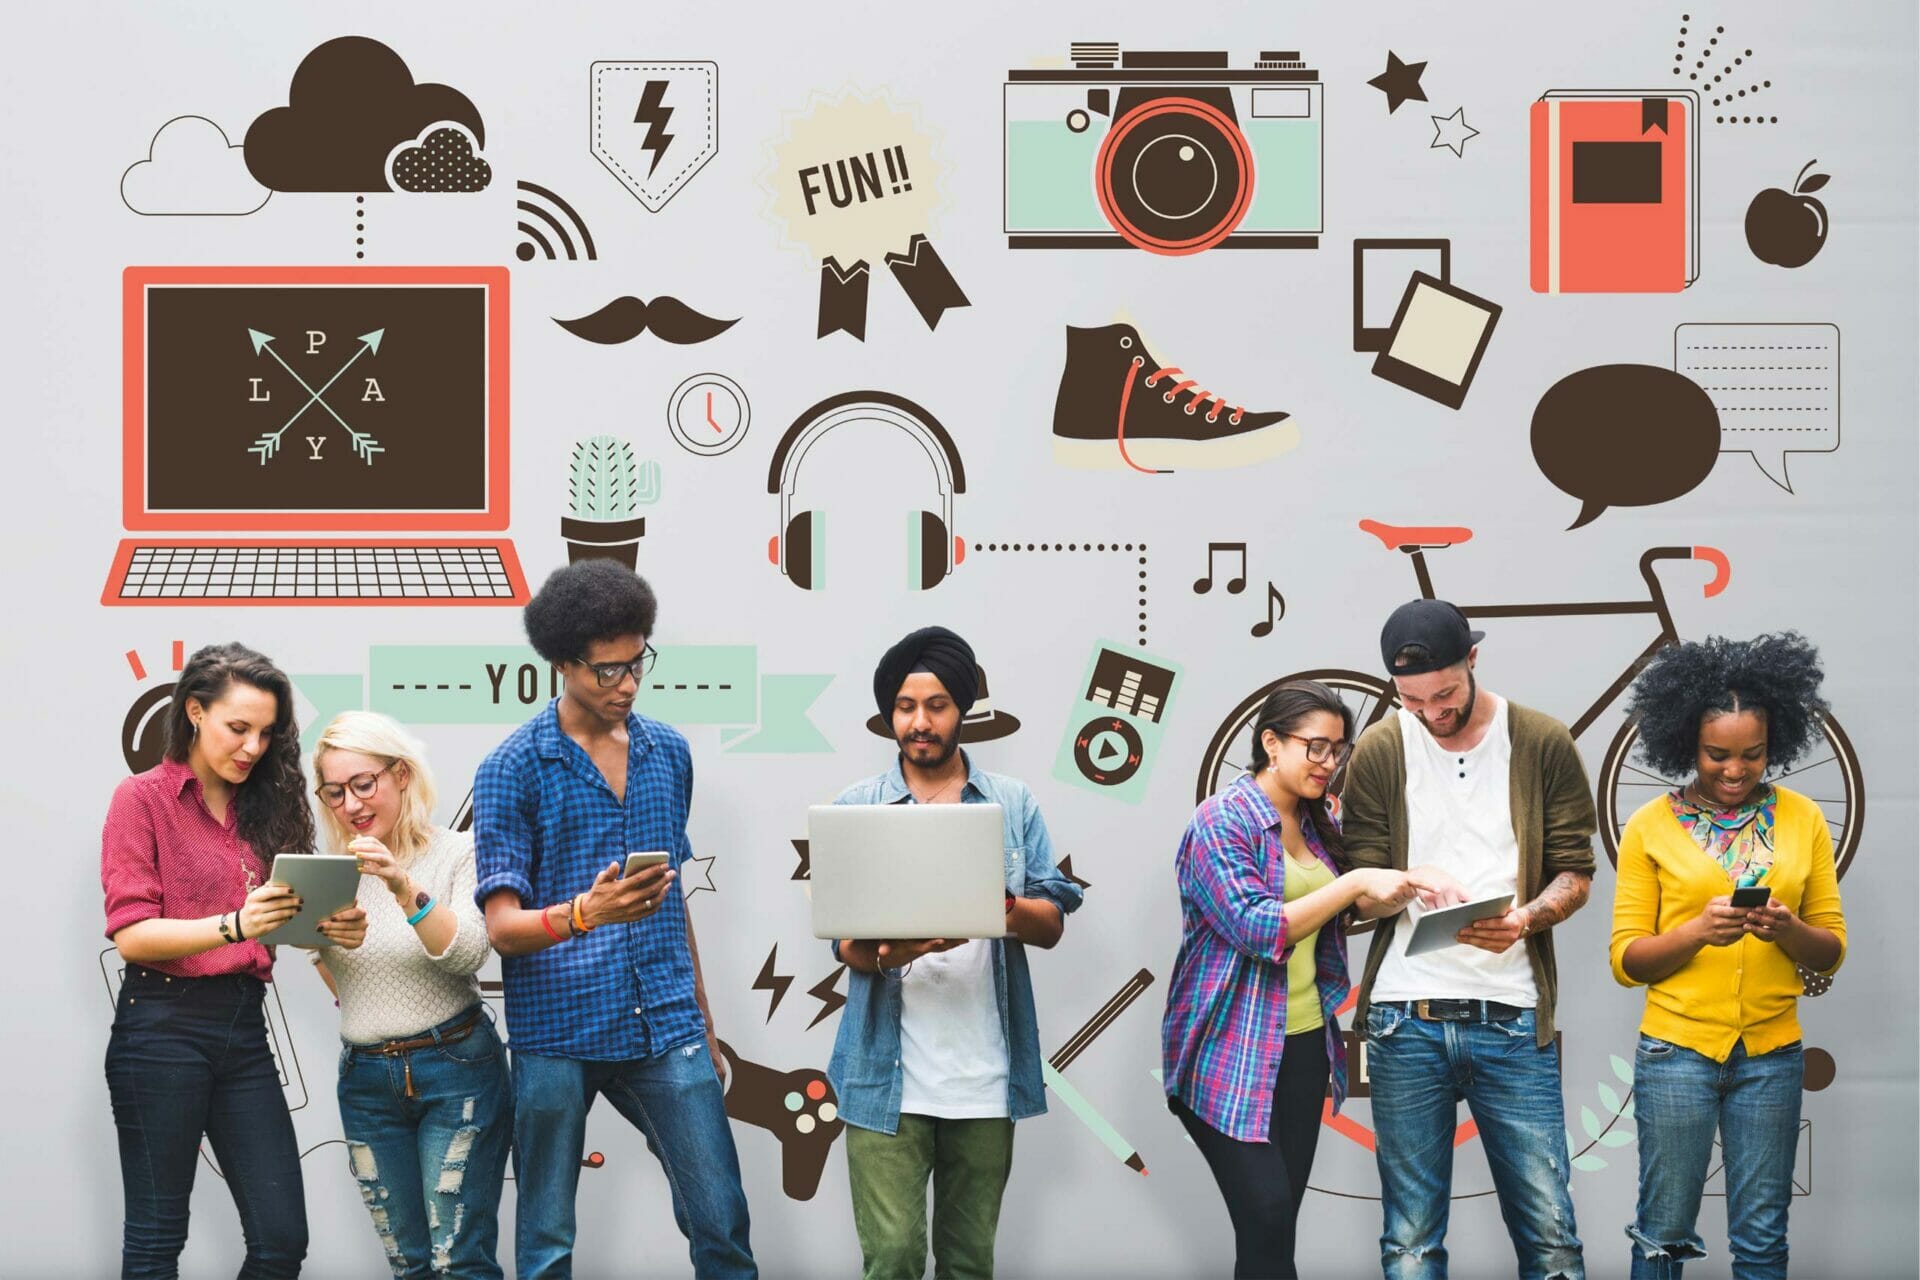 Discover seven proven strategies to help your Amazon brand capture the attention of Generation Z and strengthen your standing with current customers.